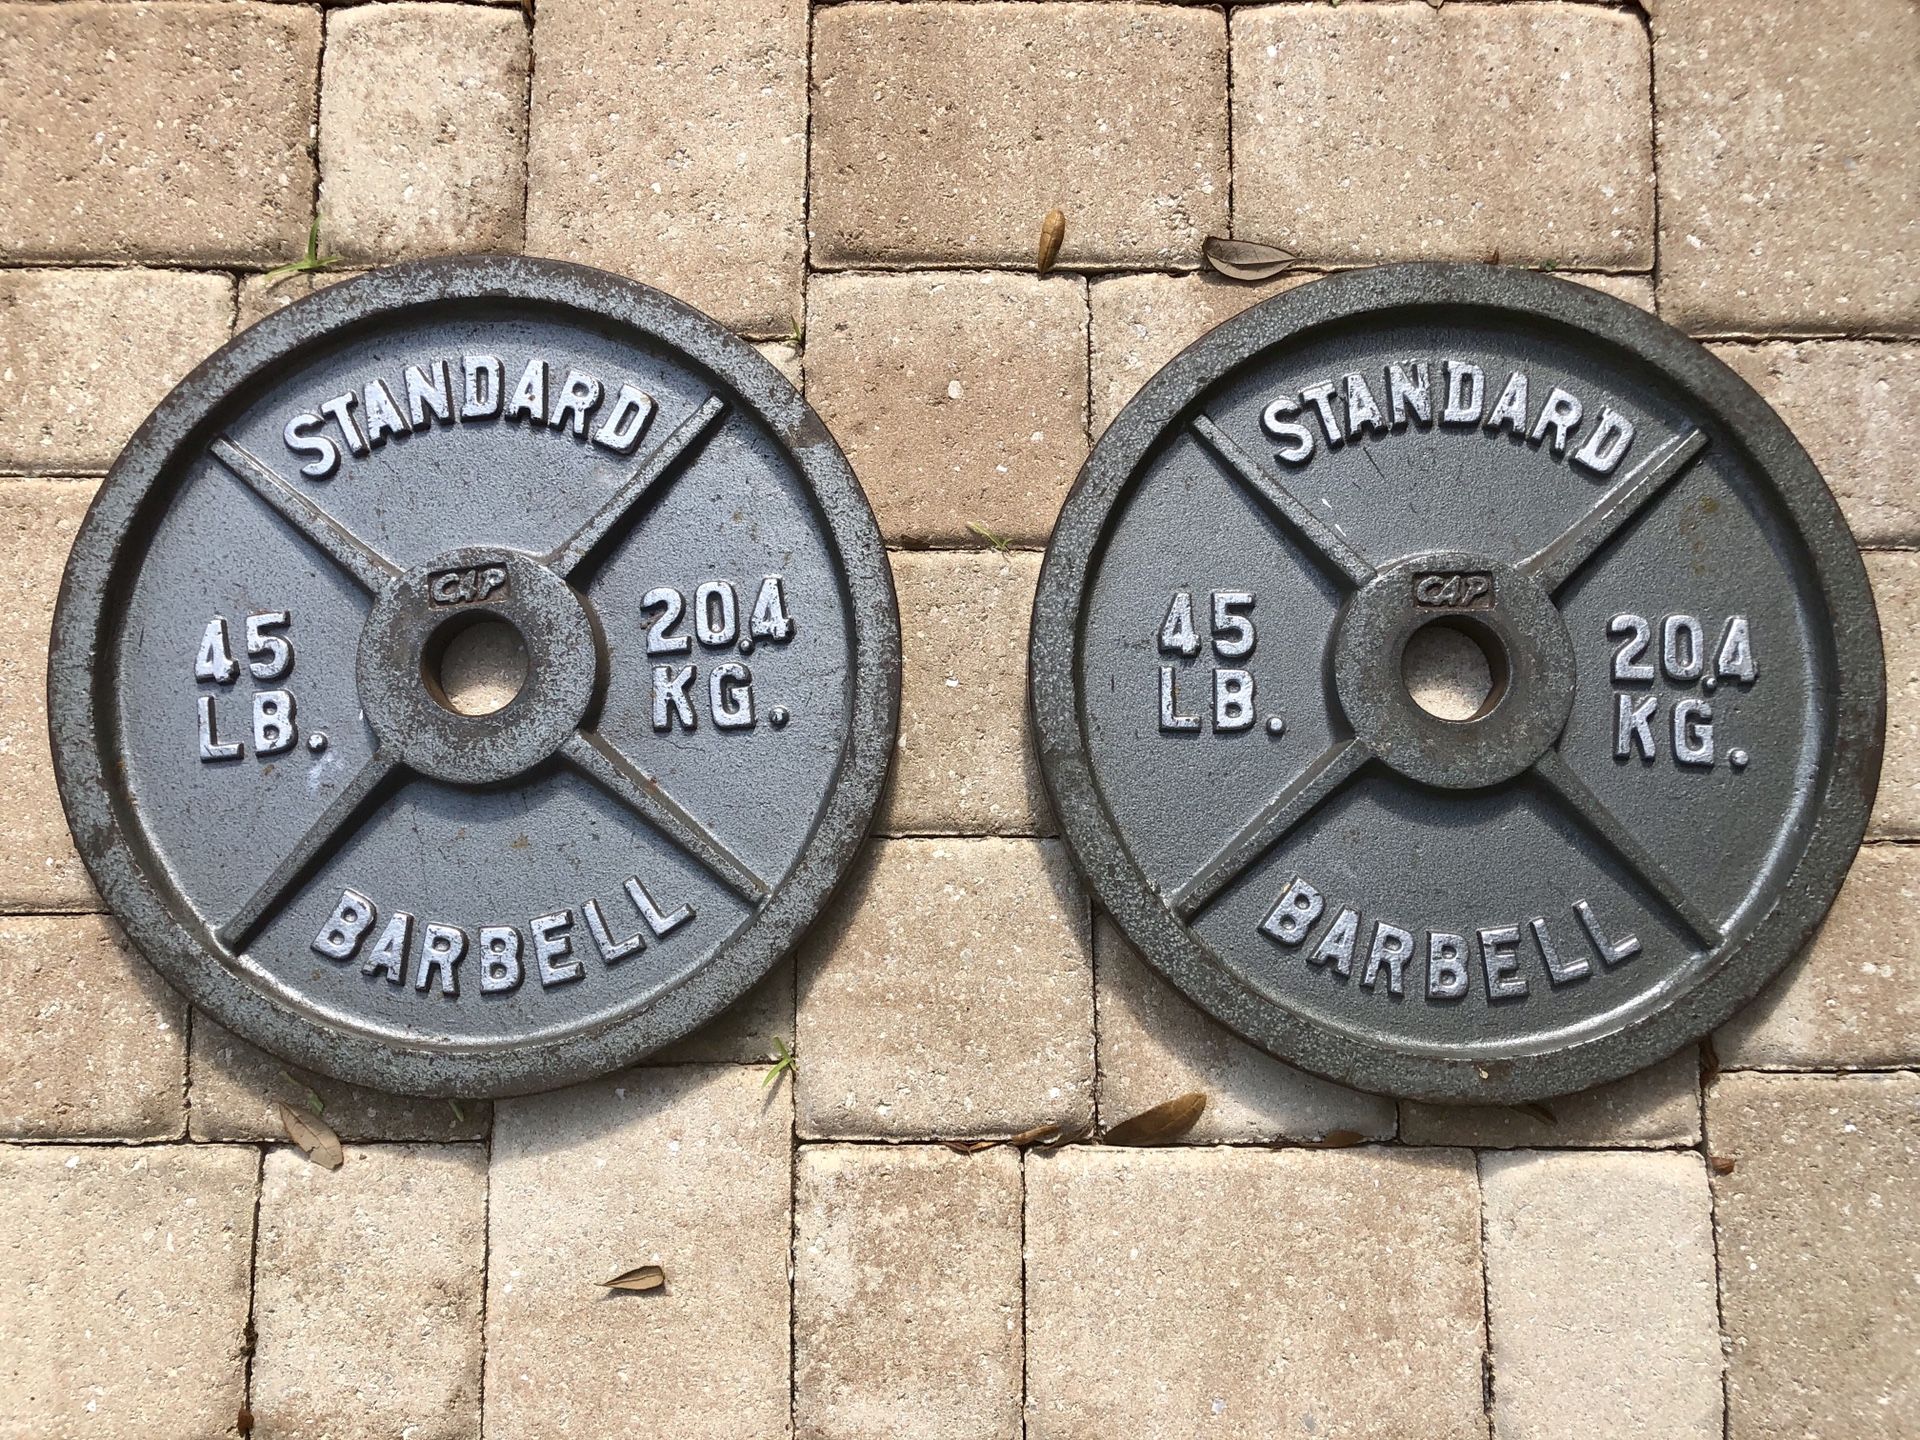 Standard Olympic Barbell Plates 45lbs